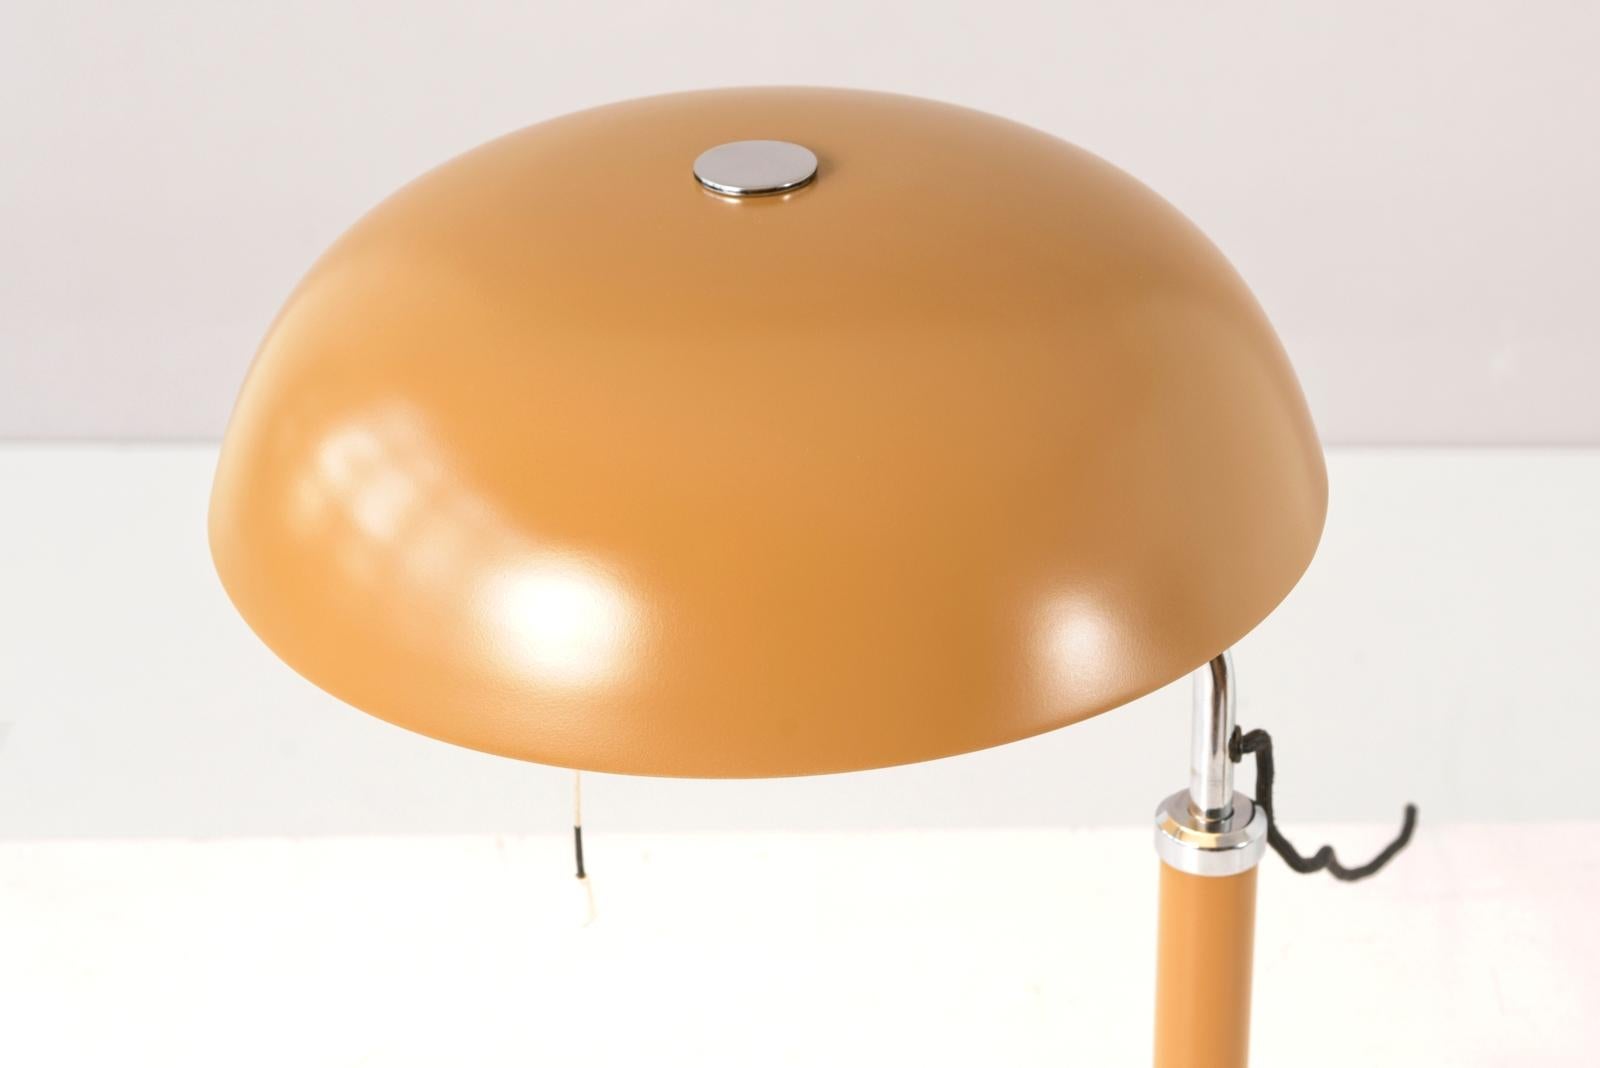 Table Lamp Quick 1500 by Alfred Müller for Amba, Switzerland - 1959 For Sale 4